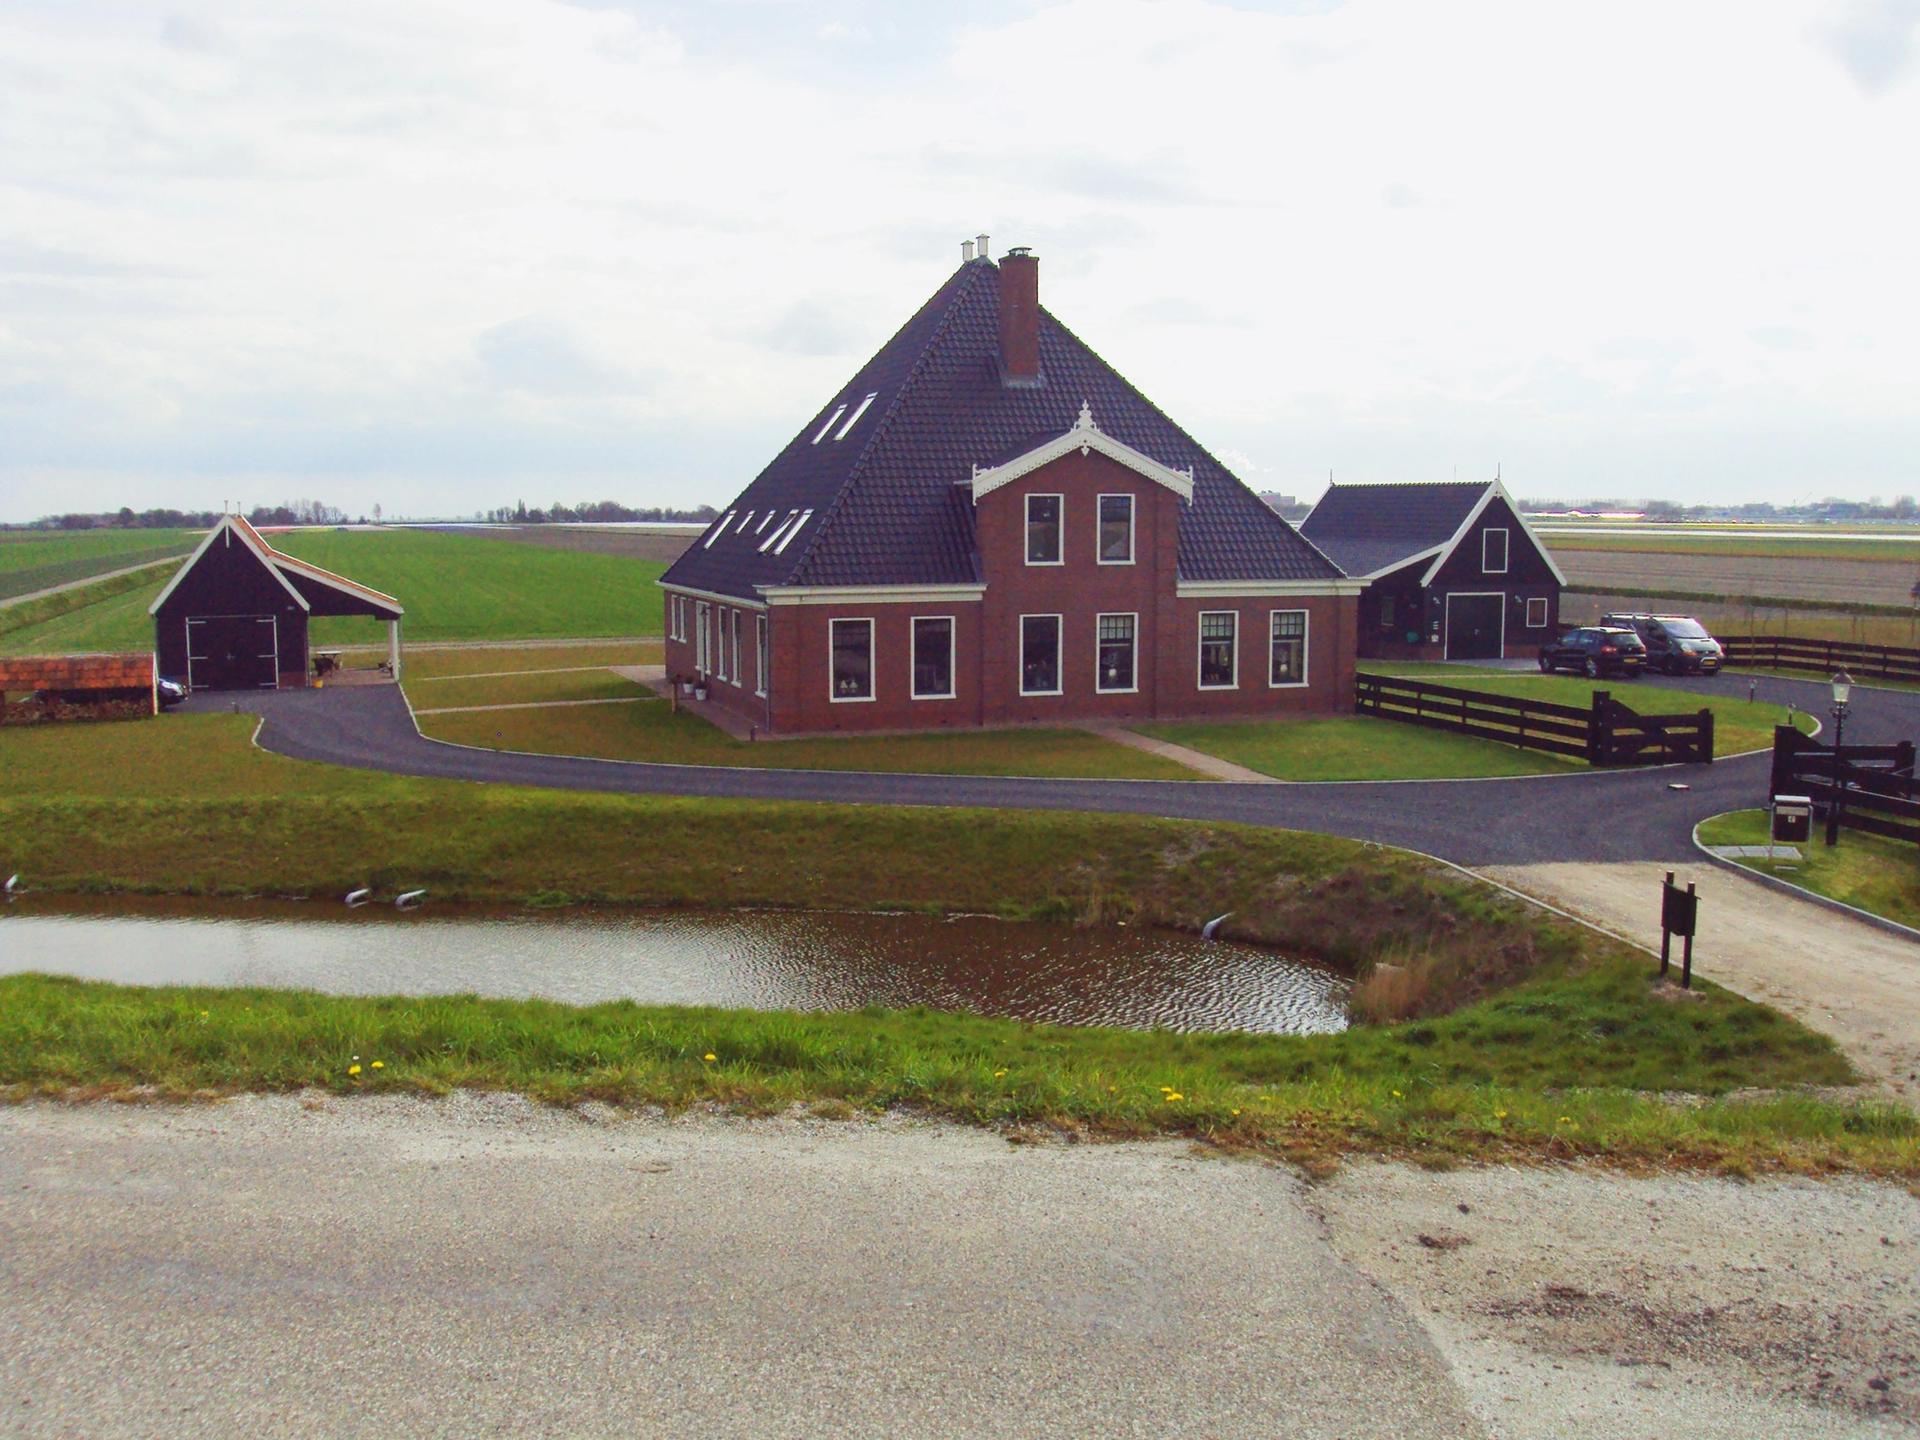 The pyramidal farmhouse, the Stolpboerderij, received UNESCO World Heritage status in the Beemster. It used to house cattle, a family, and feed under one huge unapologetic roof. In new versions, it comes with a double parking space for a pony.